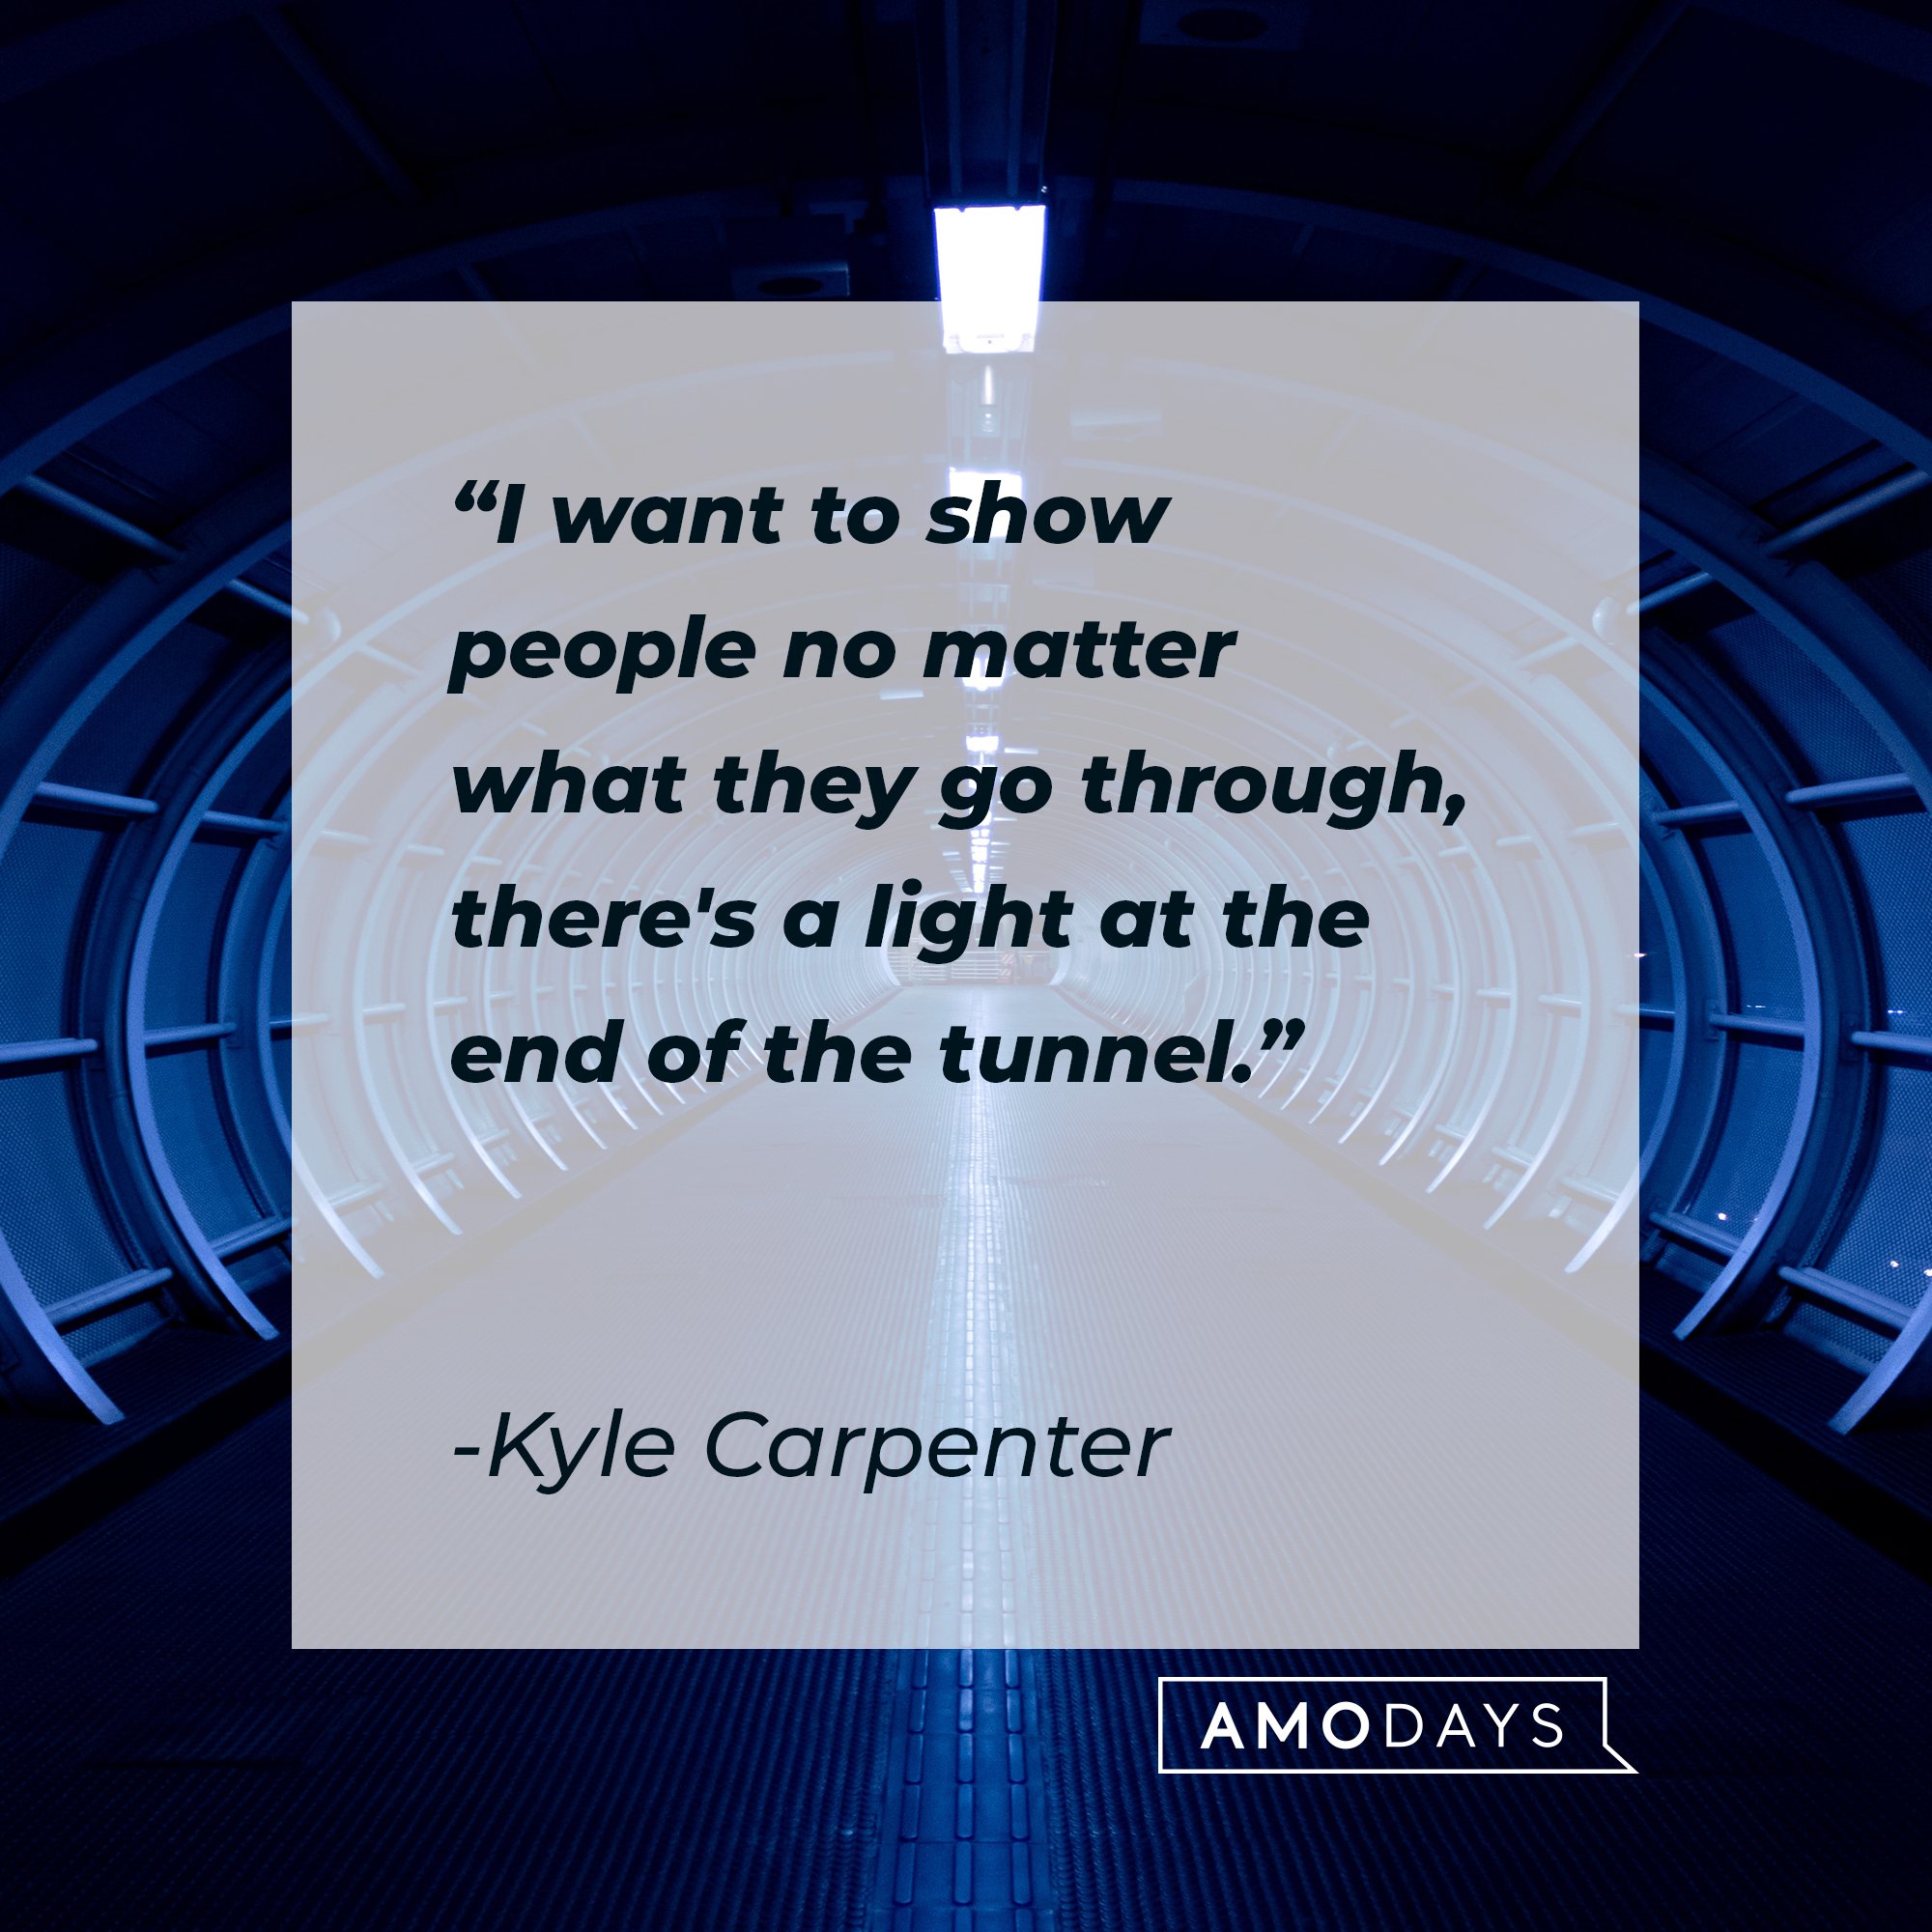 Kyle Carpenter’s quote: "I want to show people no matter what they go through, there's a light at the end of the tunnel." | Image: AmoDays